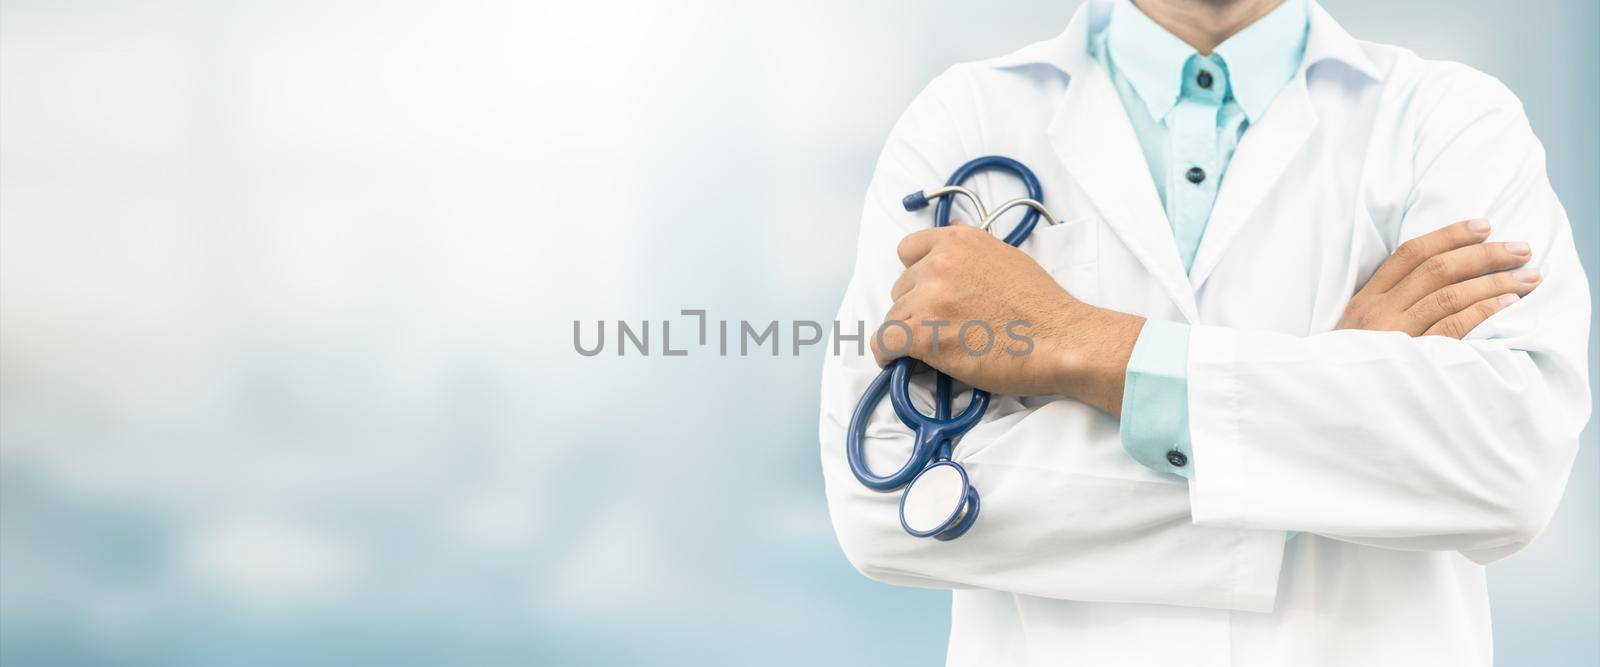 Doctor in hospital background with copy space. Healthcare and medical concept.